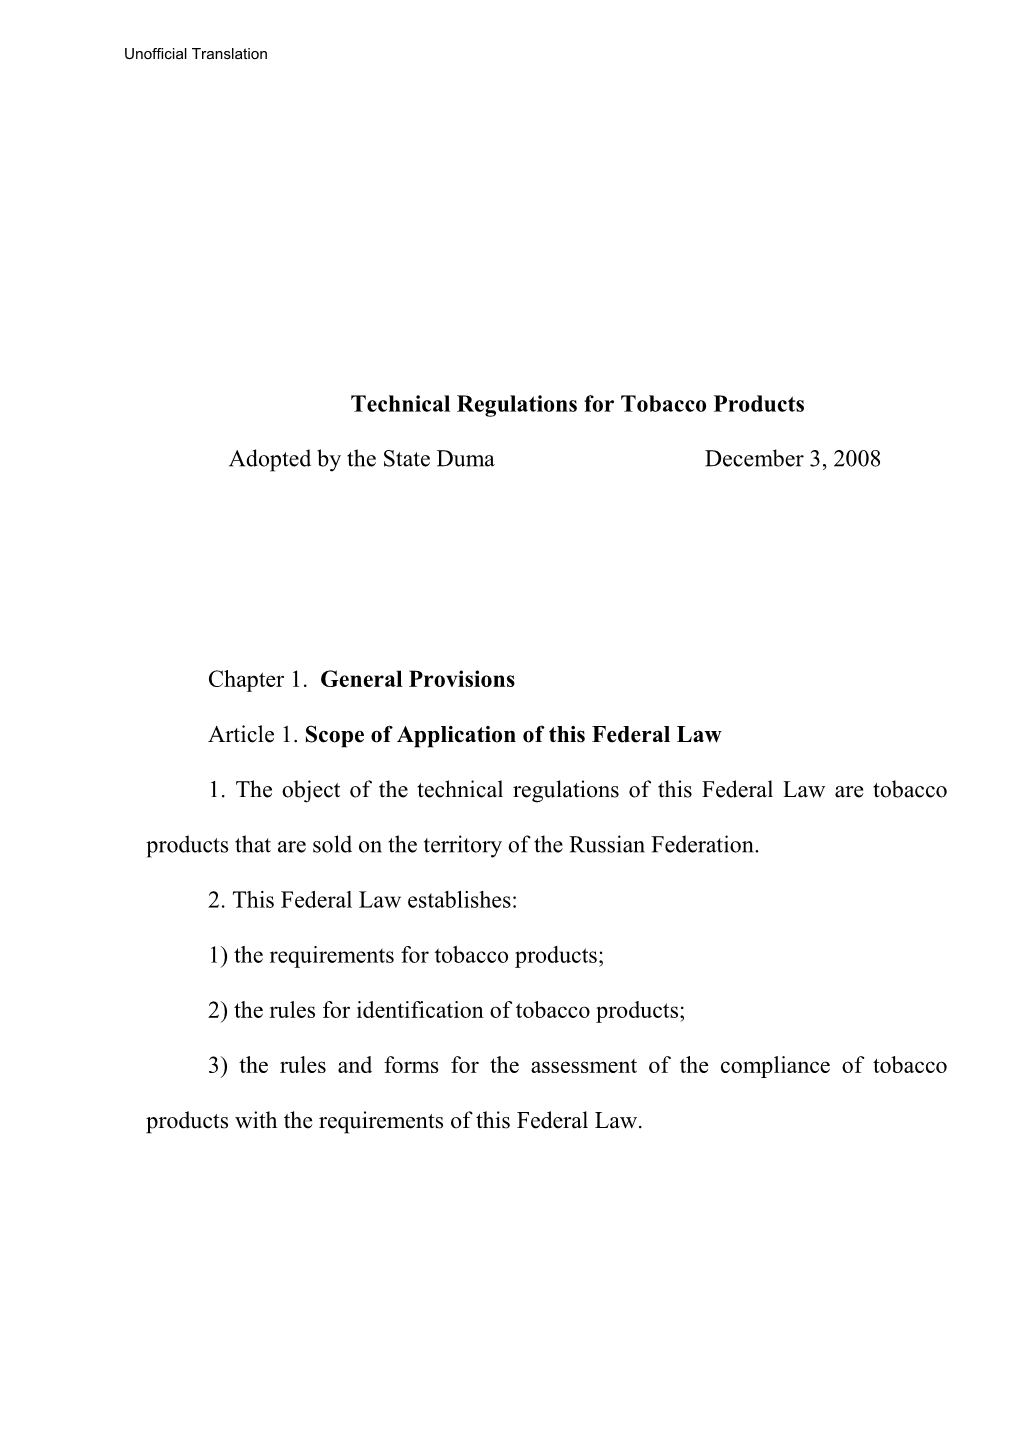 Technical Regulations for Tobacco Products